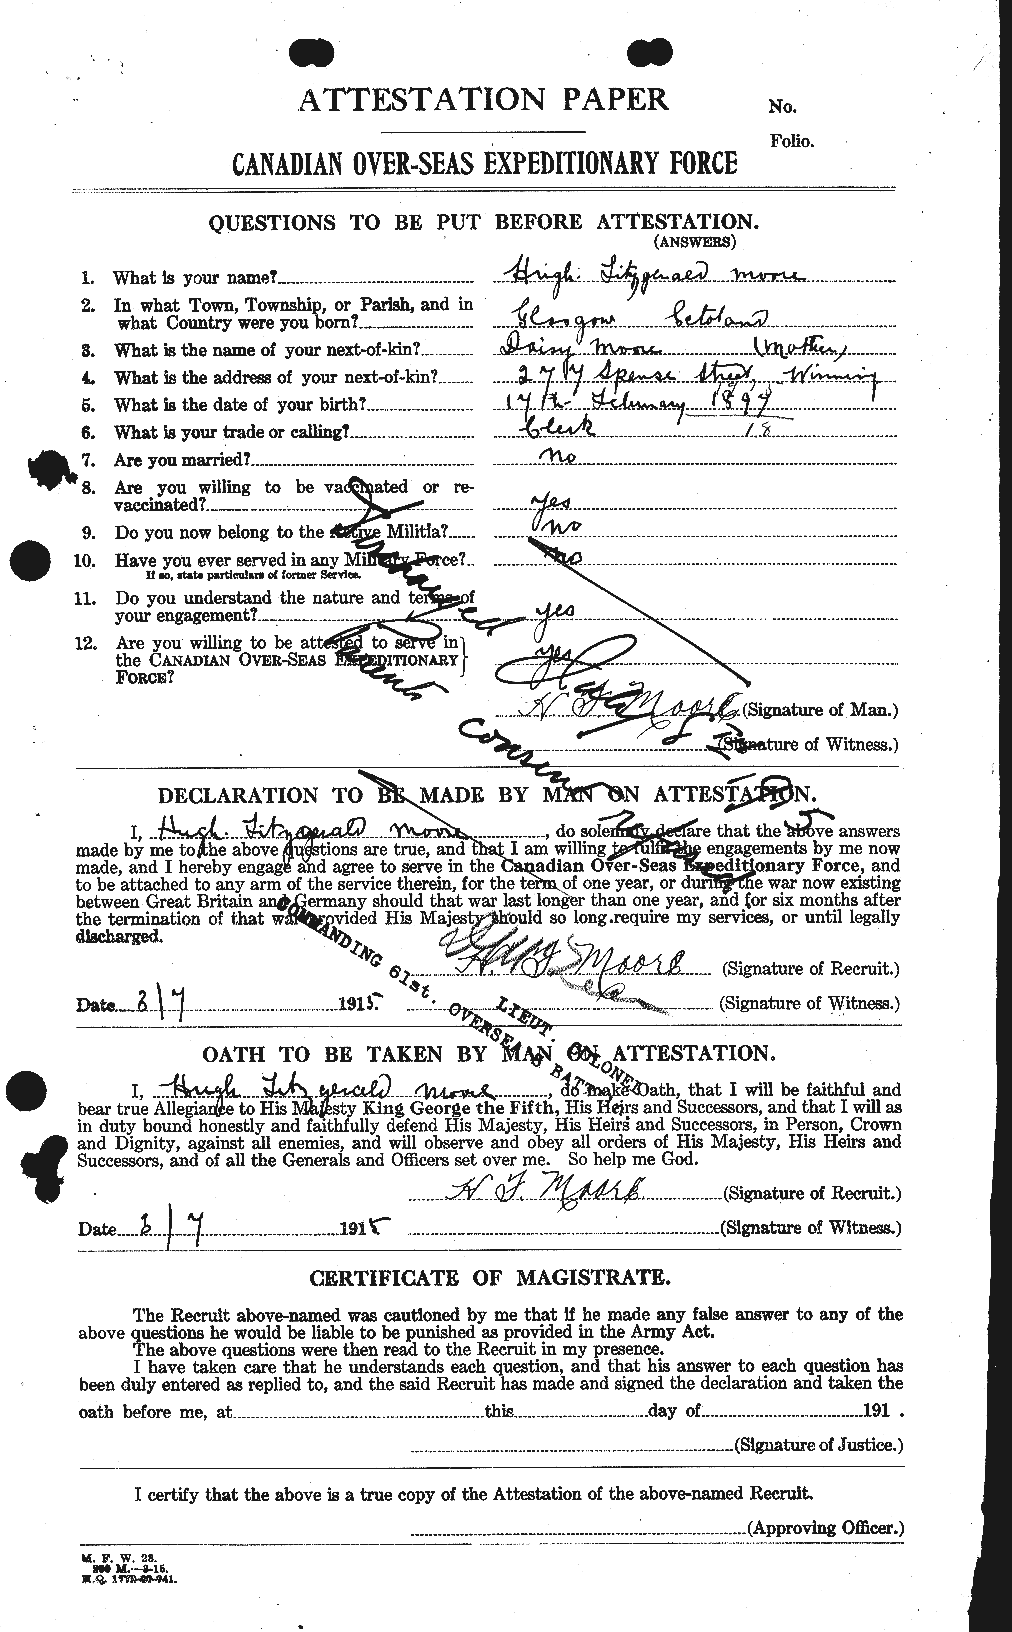 Personnel Records of the First World War - CEF 502150a